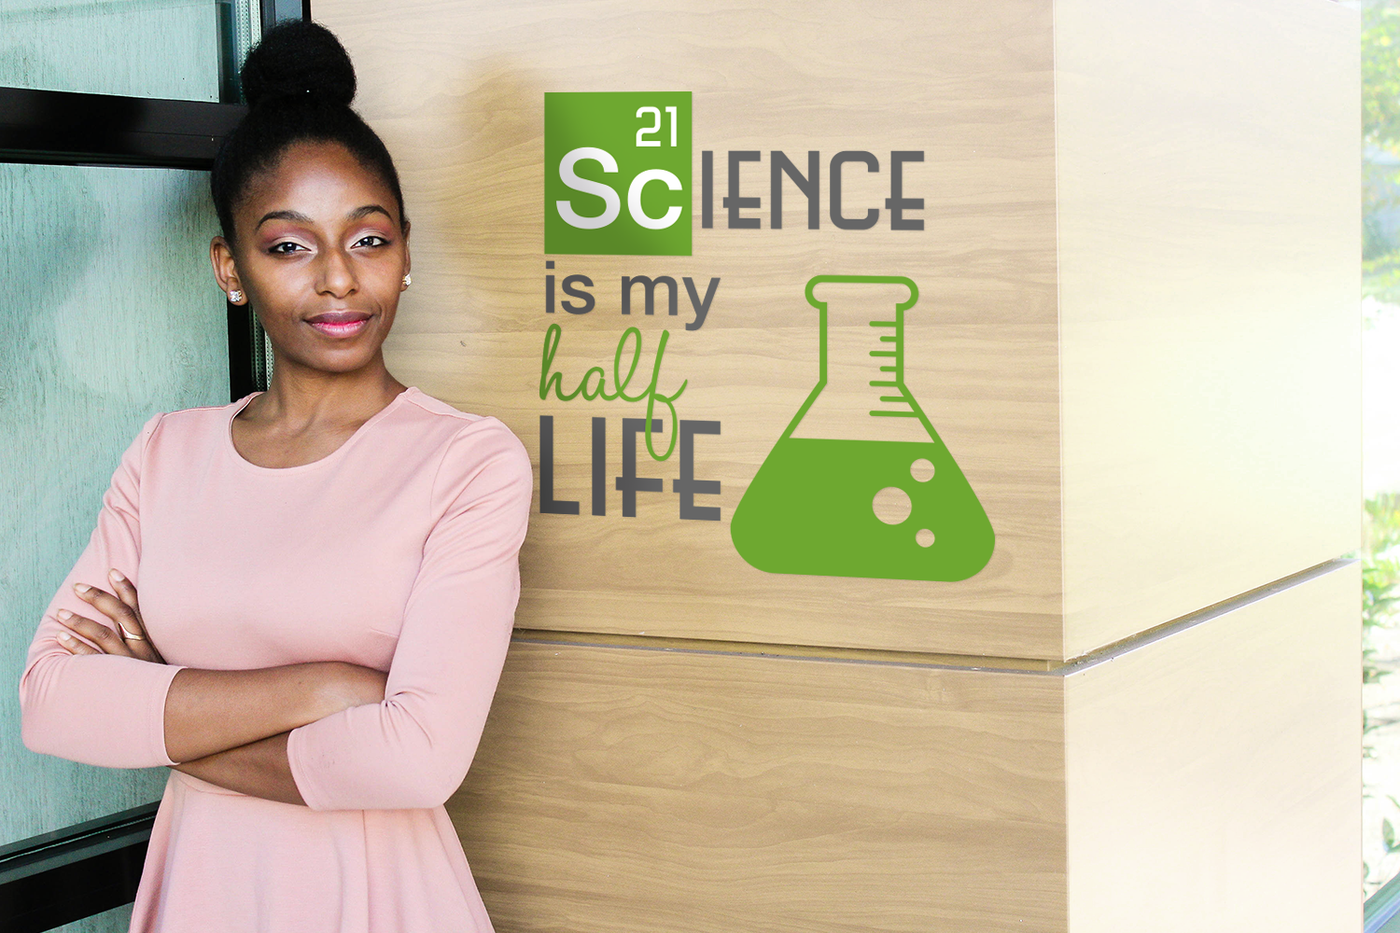 Black woman stands in front of a wall with a smile and folded arms. On the wall is a design that says "Science is my half life" with a scientific flask.